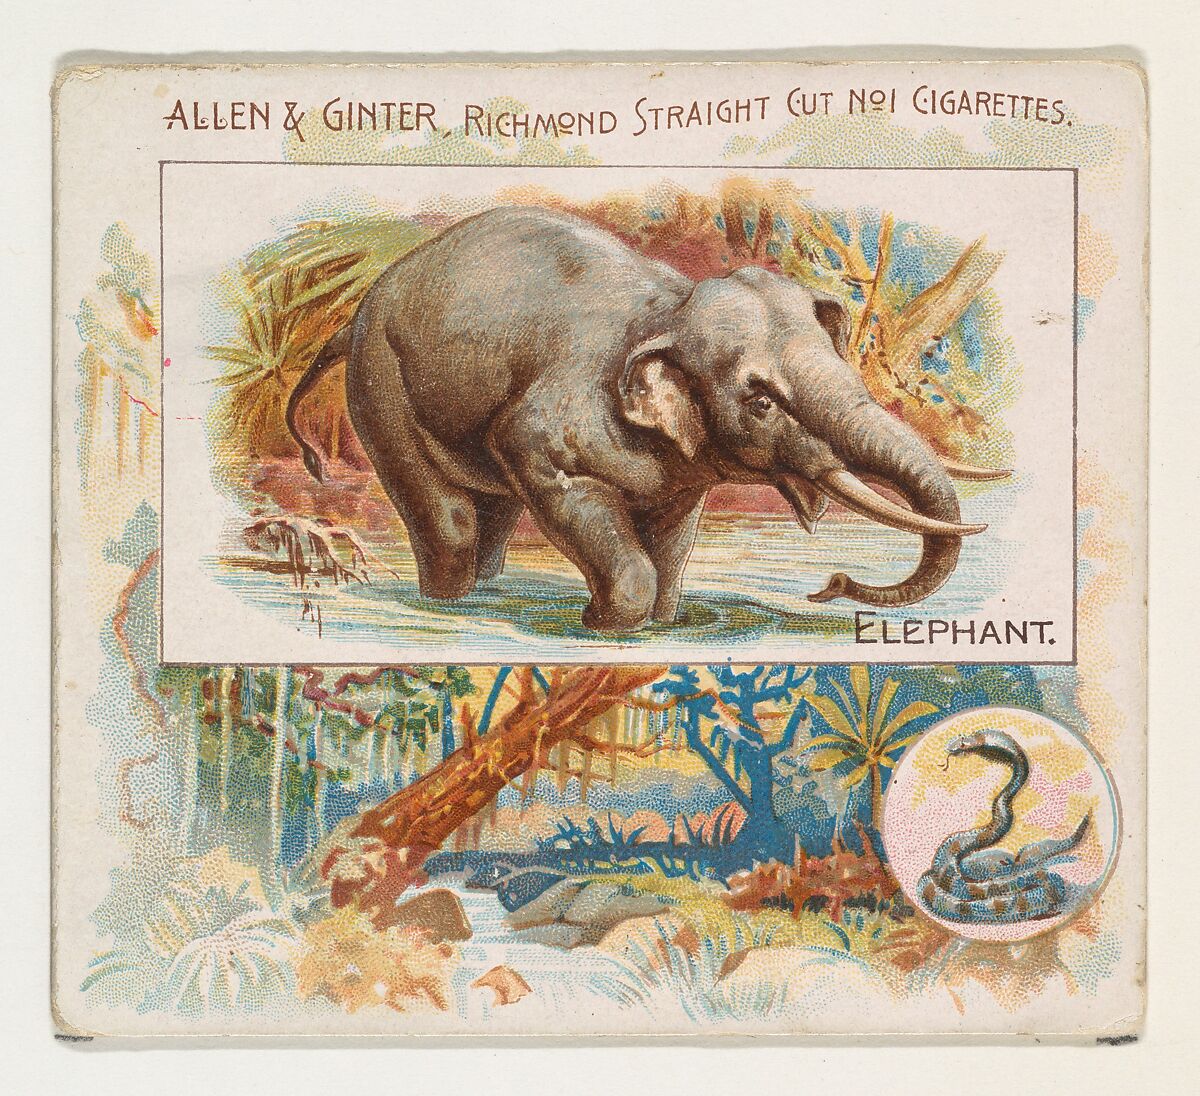 Elephant, from Quadrupeds series (N41) for Allen & Ginter Cigarettes, Issued by Allen &amp; Ginter (American, Richmond, Virginia), Commercial color lithograph 